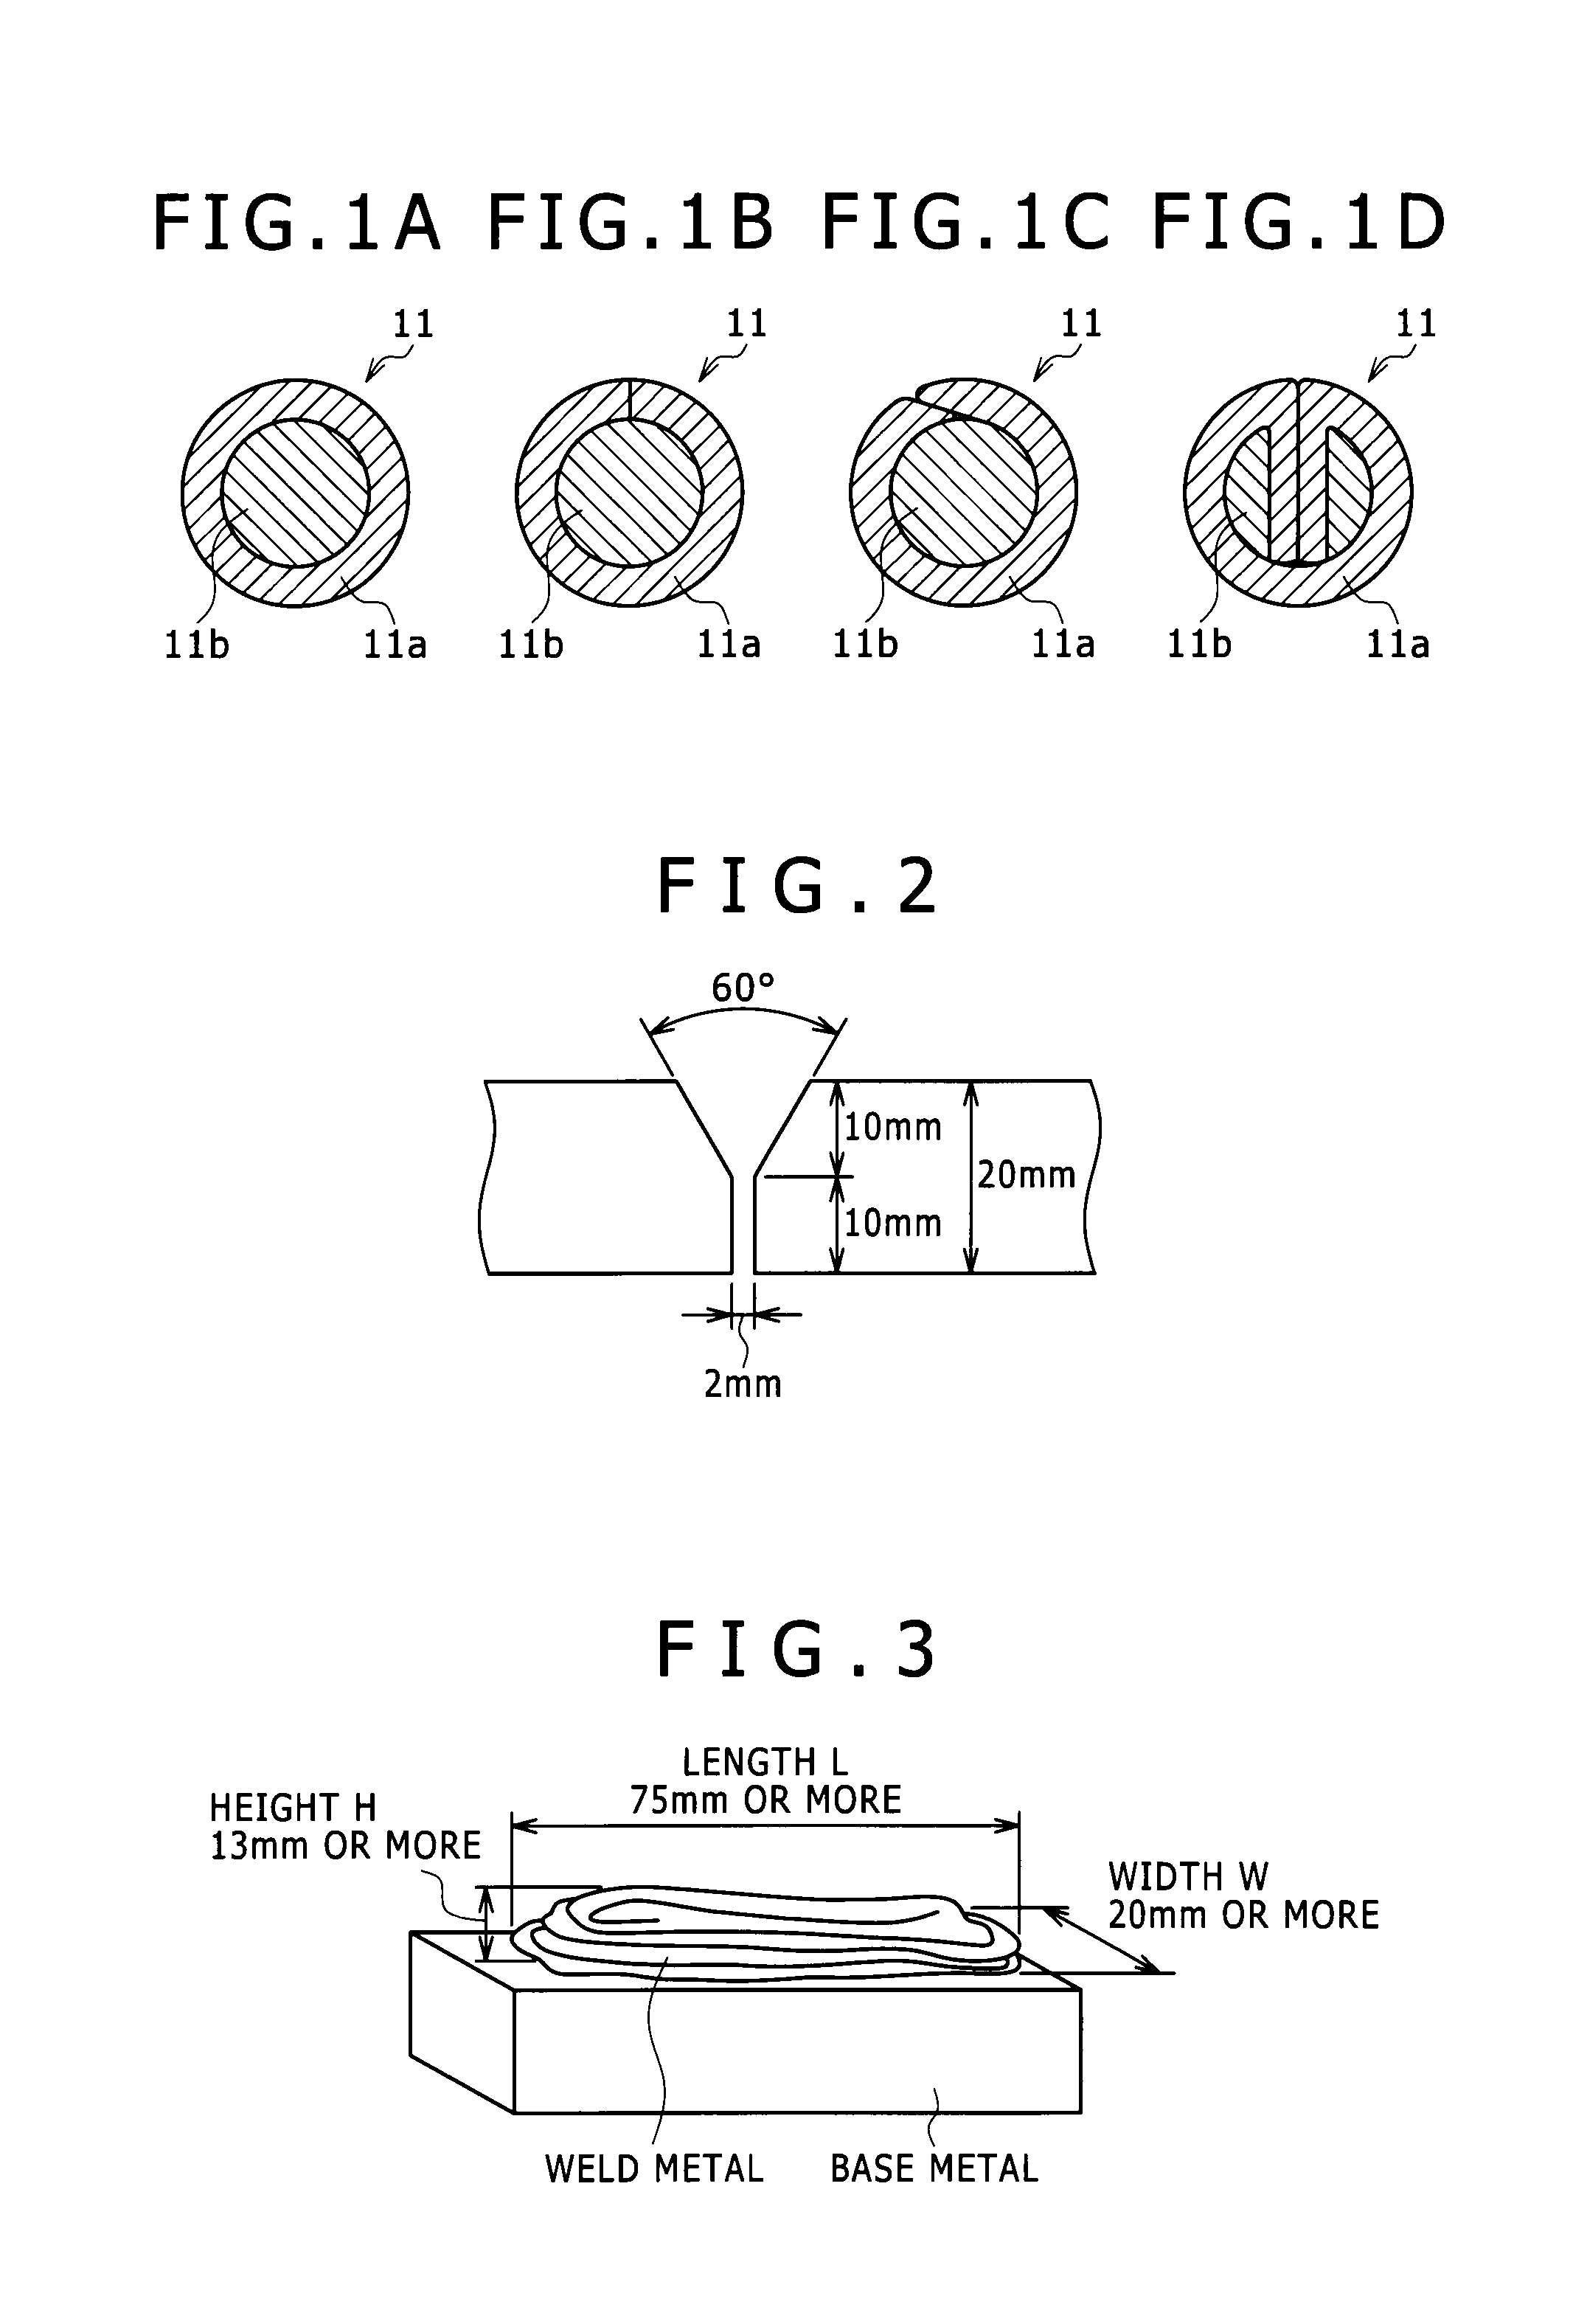 Flux-cored nickel-based alloy wire